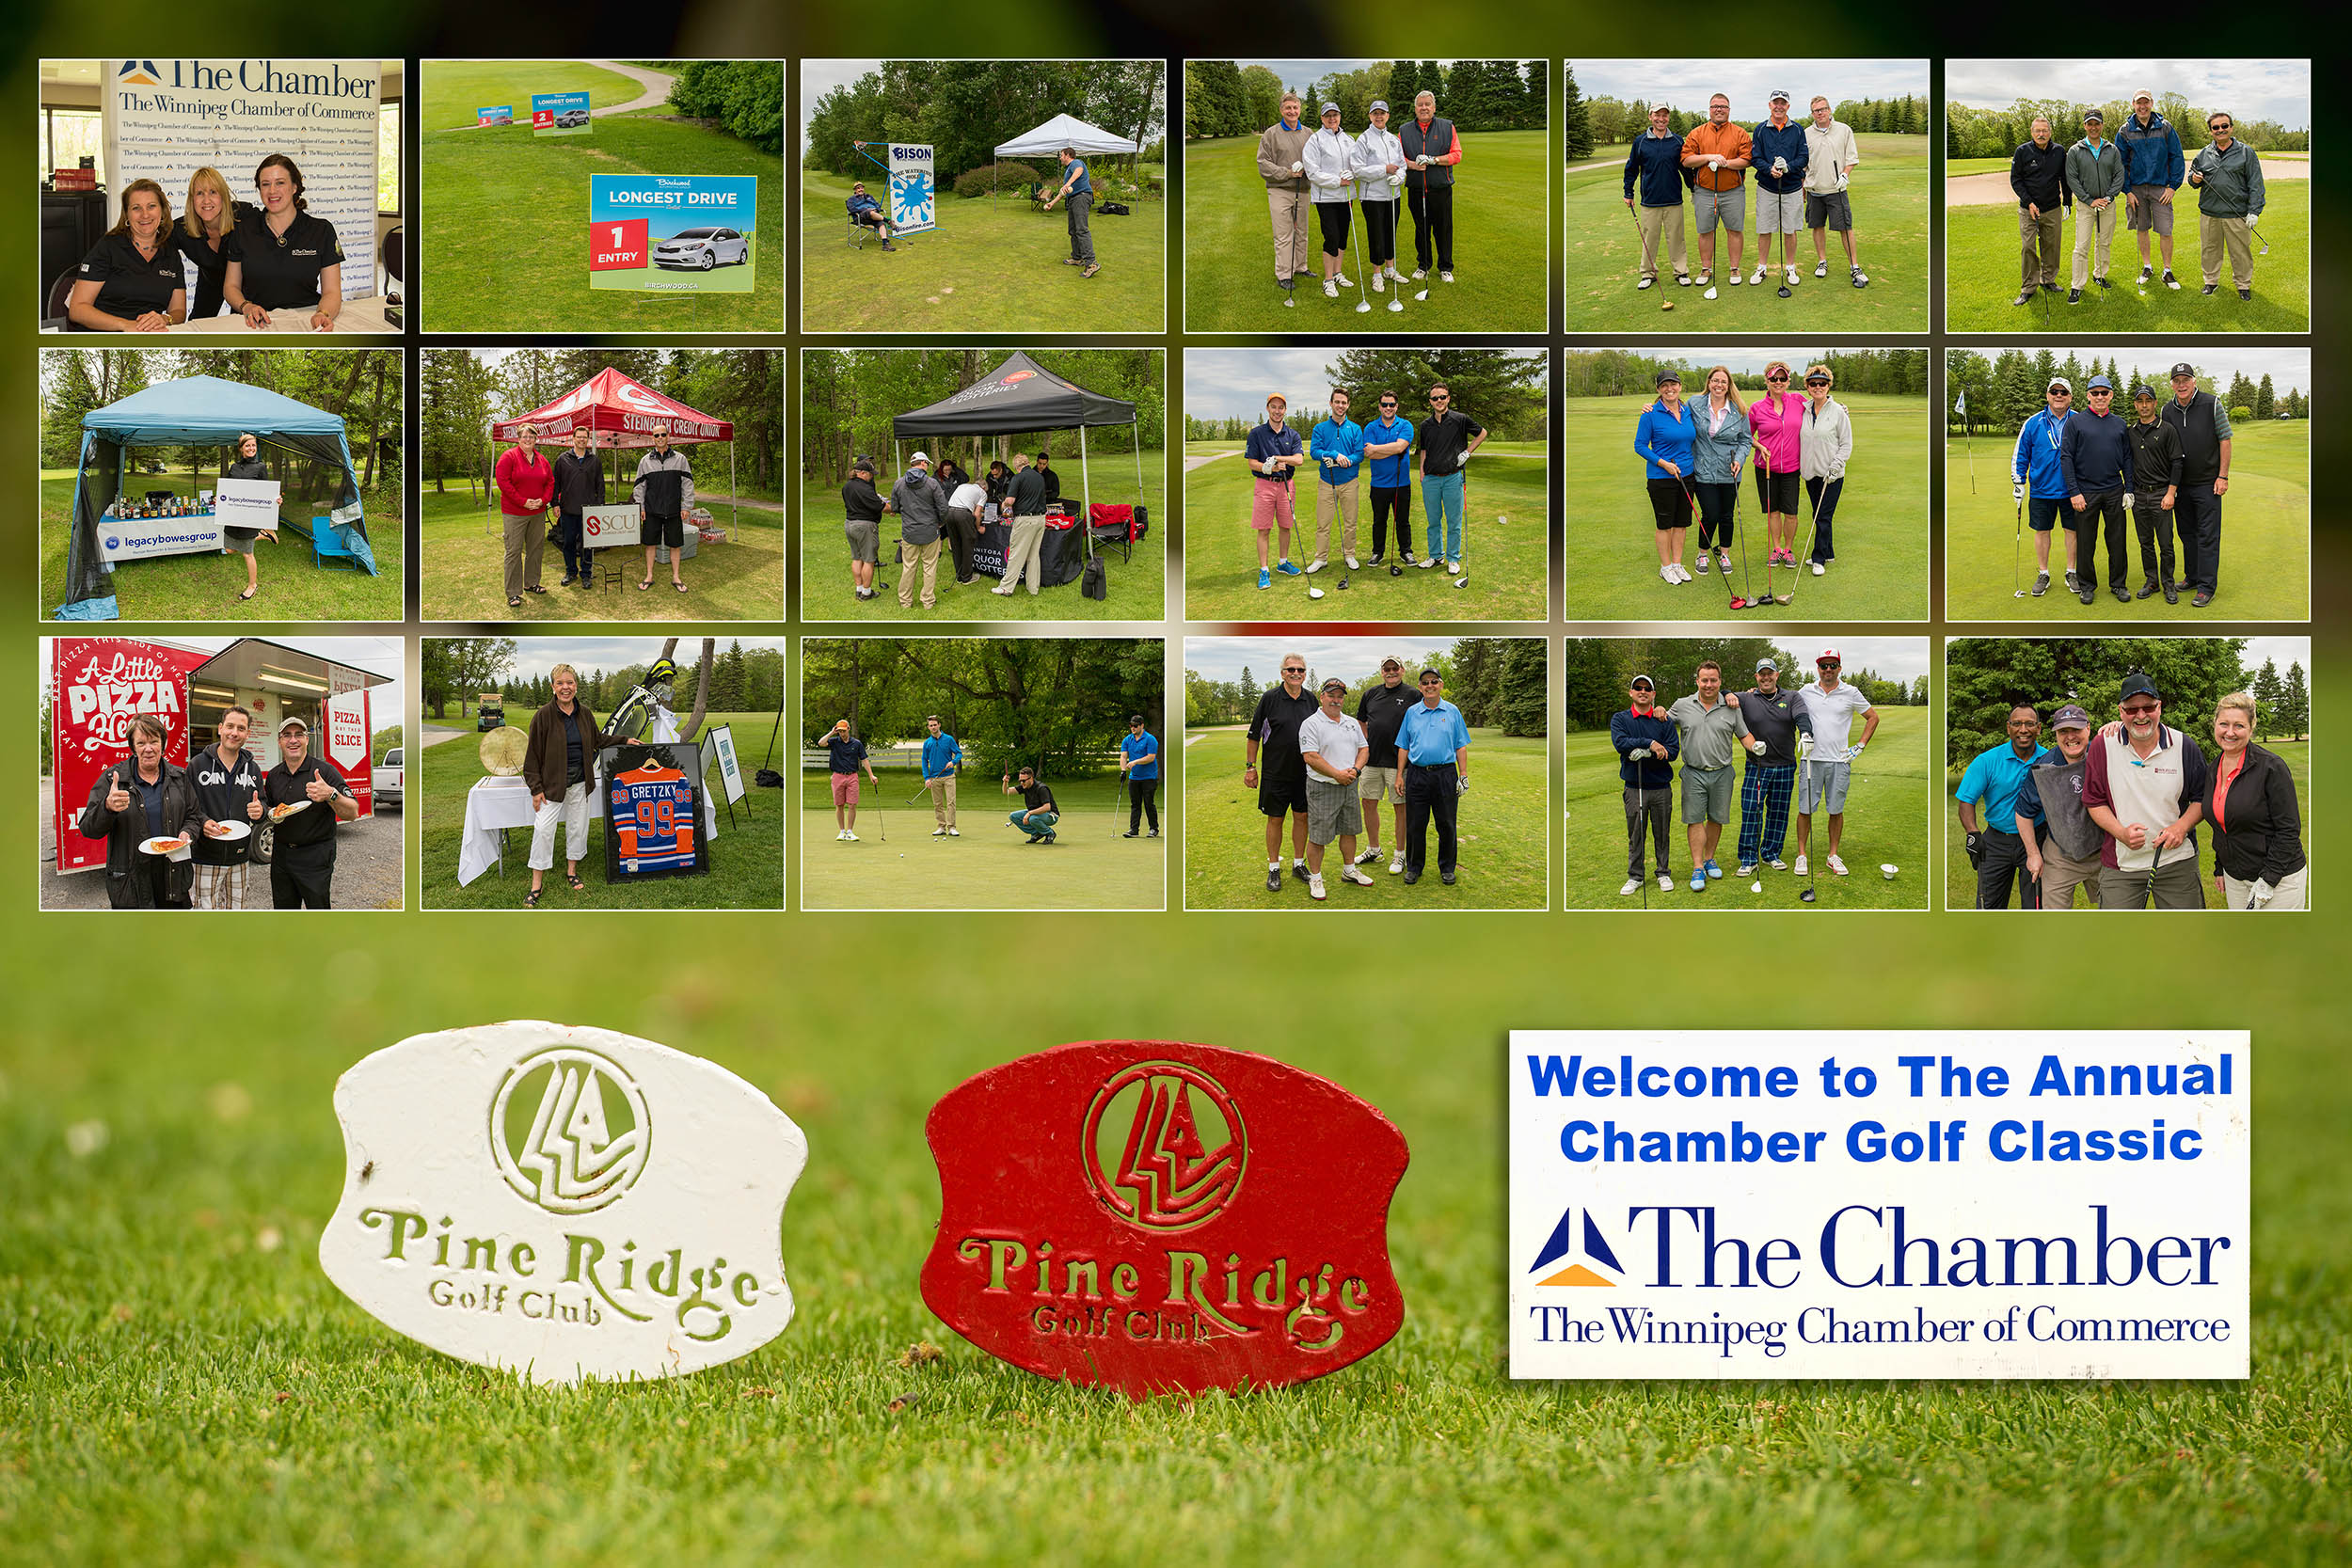 The Annual Chamber Golf Classic